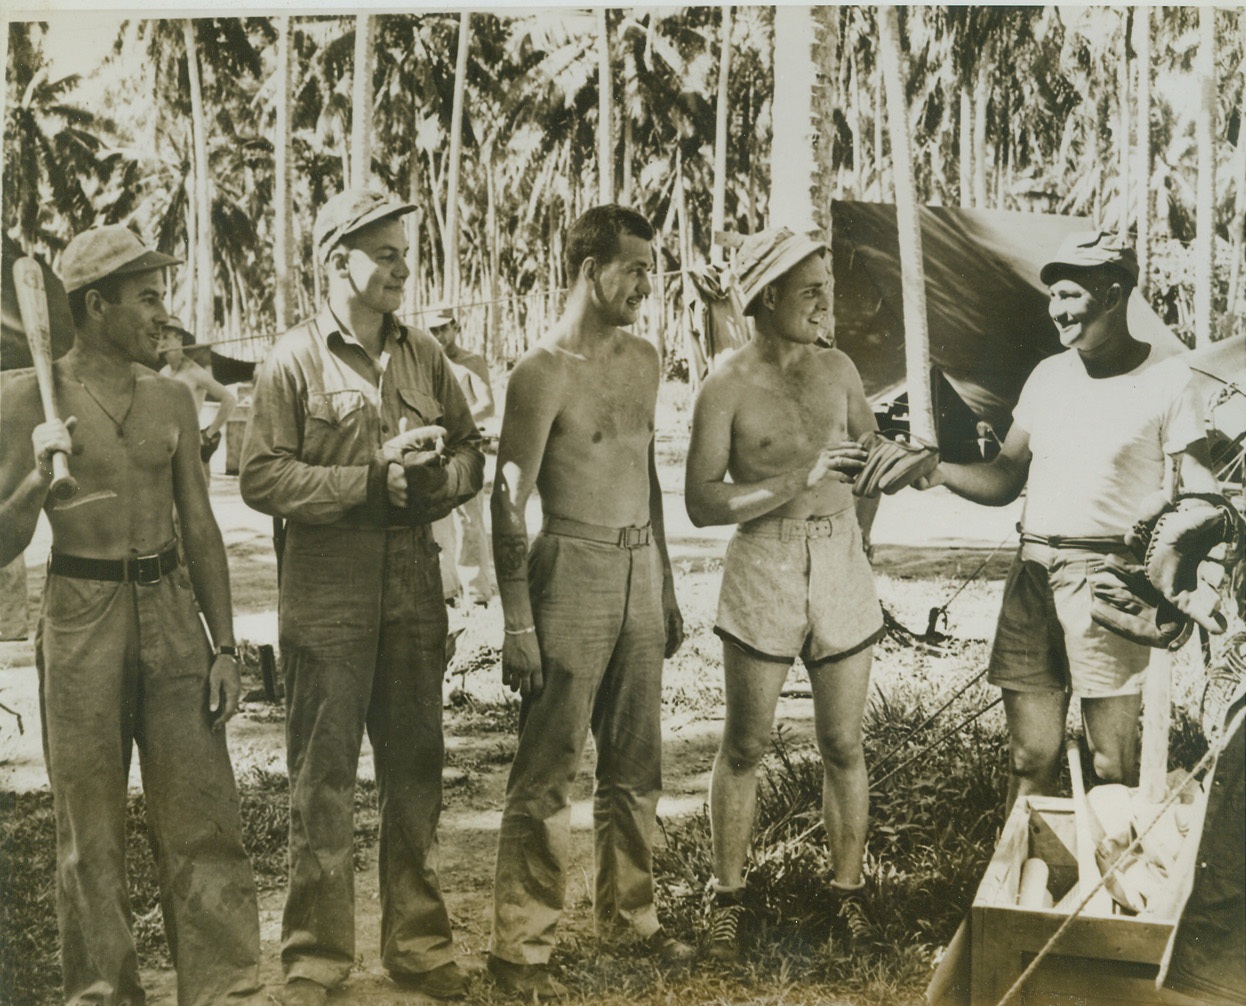 Time Out for Baseball, 9/24/1943. SOMEWHERE IN THE SOUTH PACIFIC -- In spite of tropical discomforts and the dangers of war, our Leathernecks always manage to find some time for a fast baseball game. Here, as the boys get ready for a game in a coconut grove, Marine Corps Chaplain, the Rev. Balthasar V. Schomer, of Council Bluffs, Ia., hands out equipment to (left to right) Sgt. Charles W. Speakman of Meadville, Pa.; Cpl. Albert G. Fissel, Newport, Ky.; Cpl. Edward S. Kowalski of Poughkeepsie, NY; and Tech. Sgt. Lawrence G. Fischer of New Orleans, La. Credit: (U.S. Marine Corps Photo From ACME);